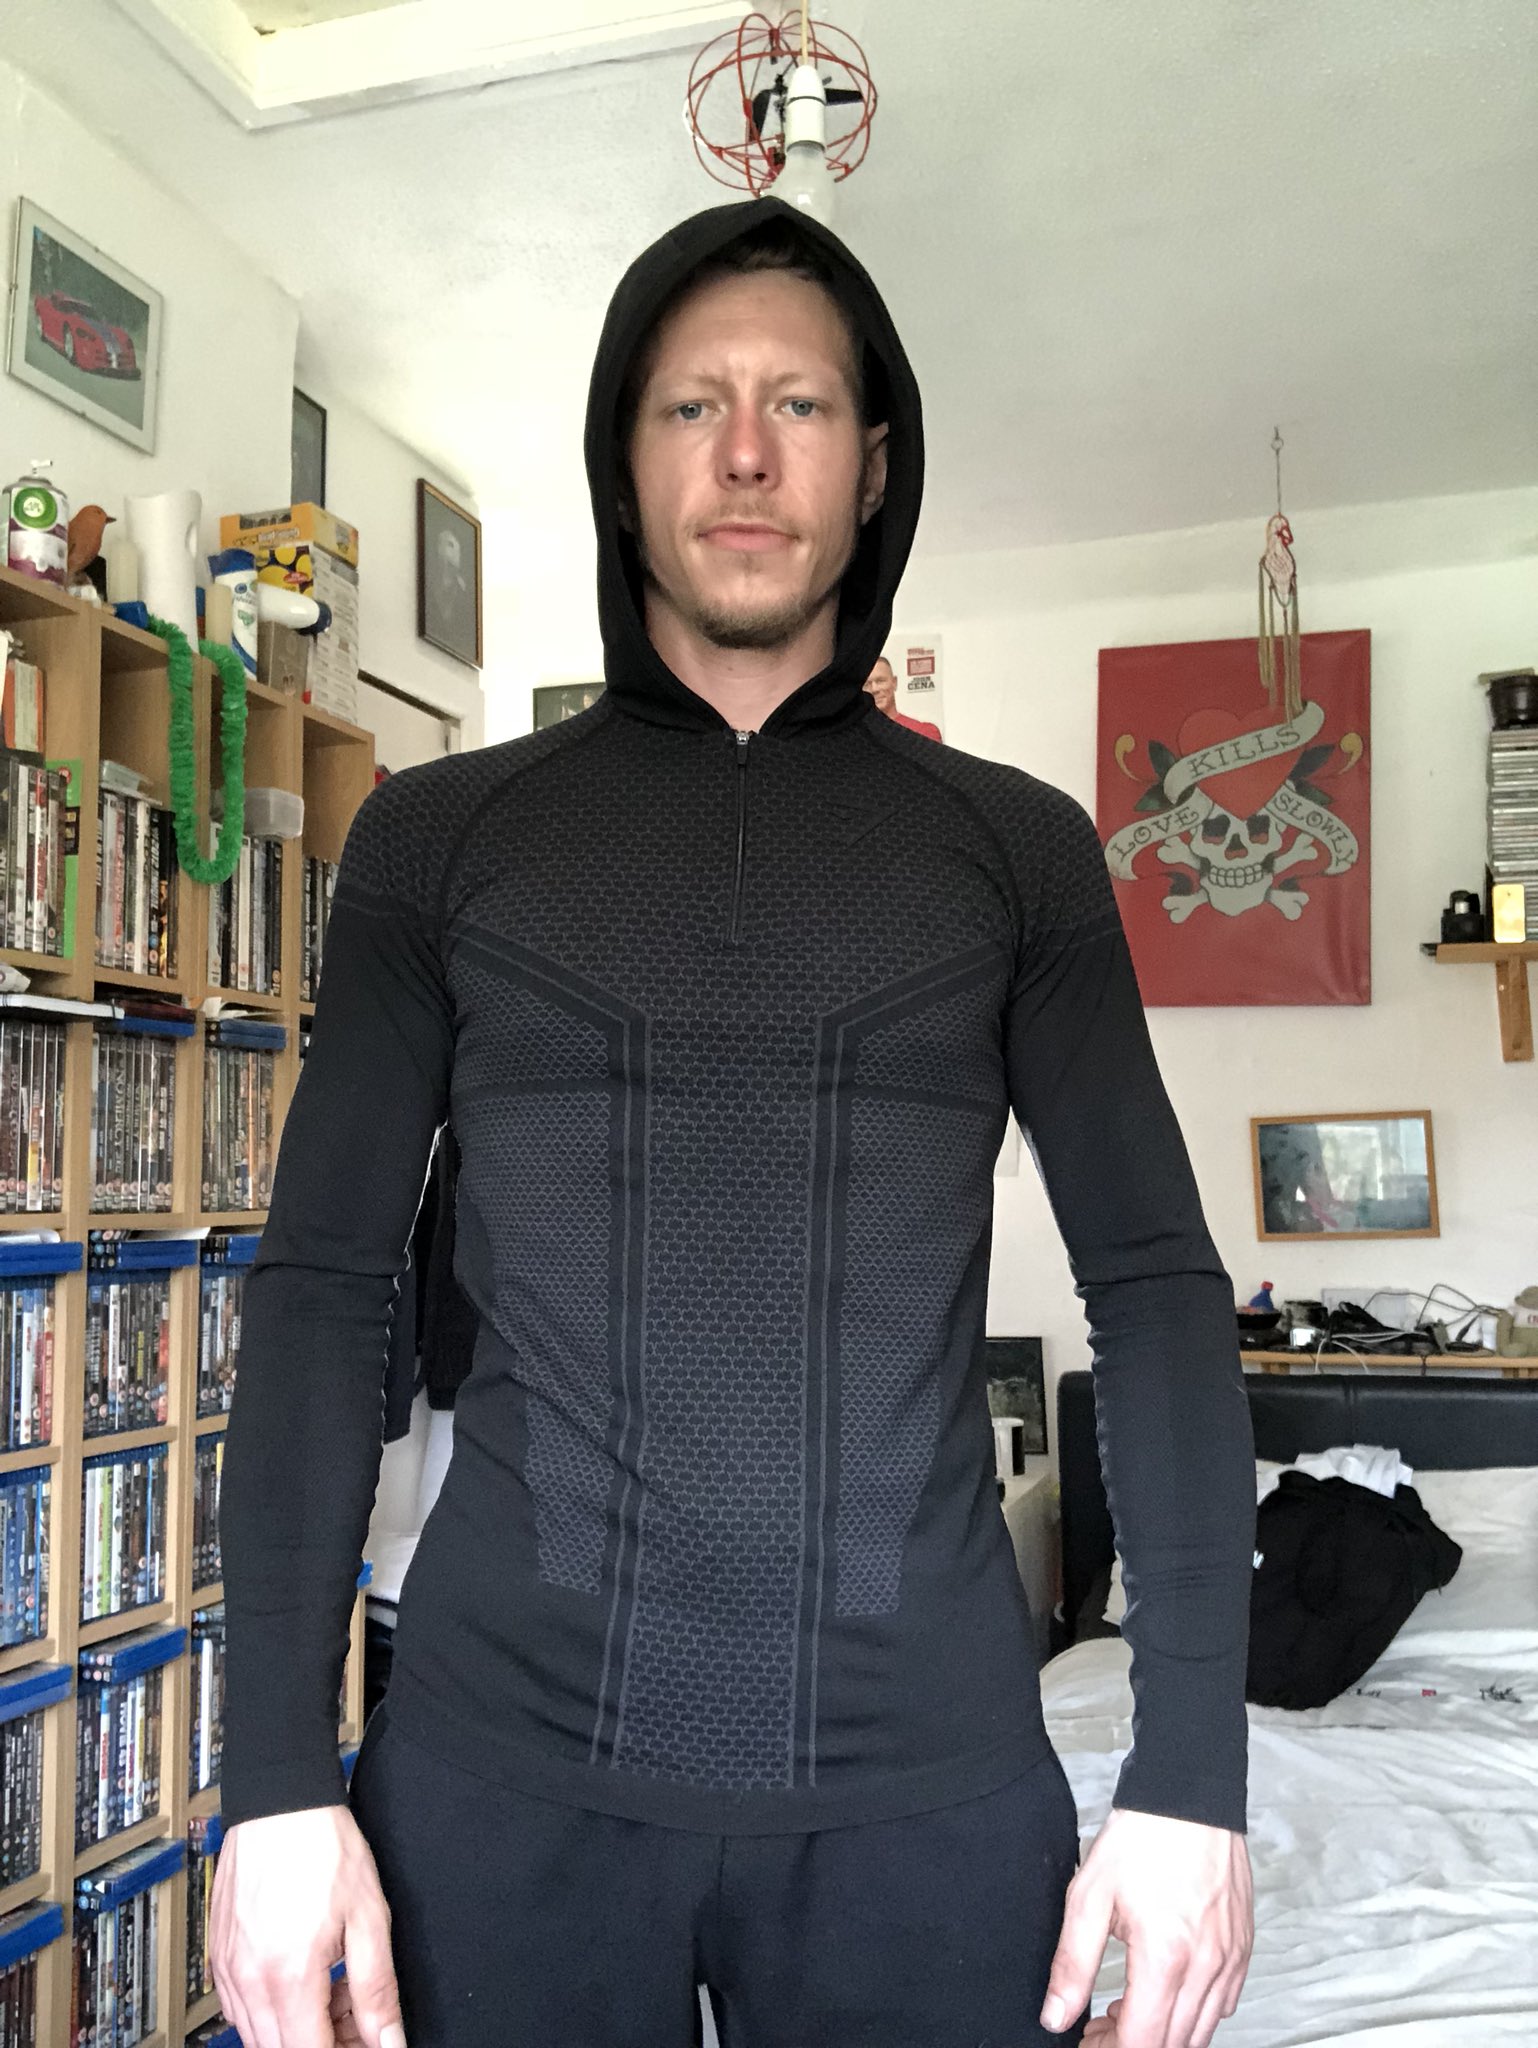 Martin Page on X: My new @Gymshark Onyx imperial LS hooded top in